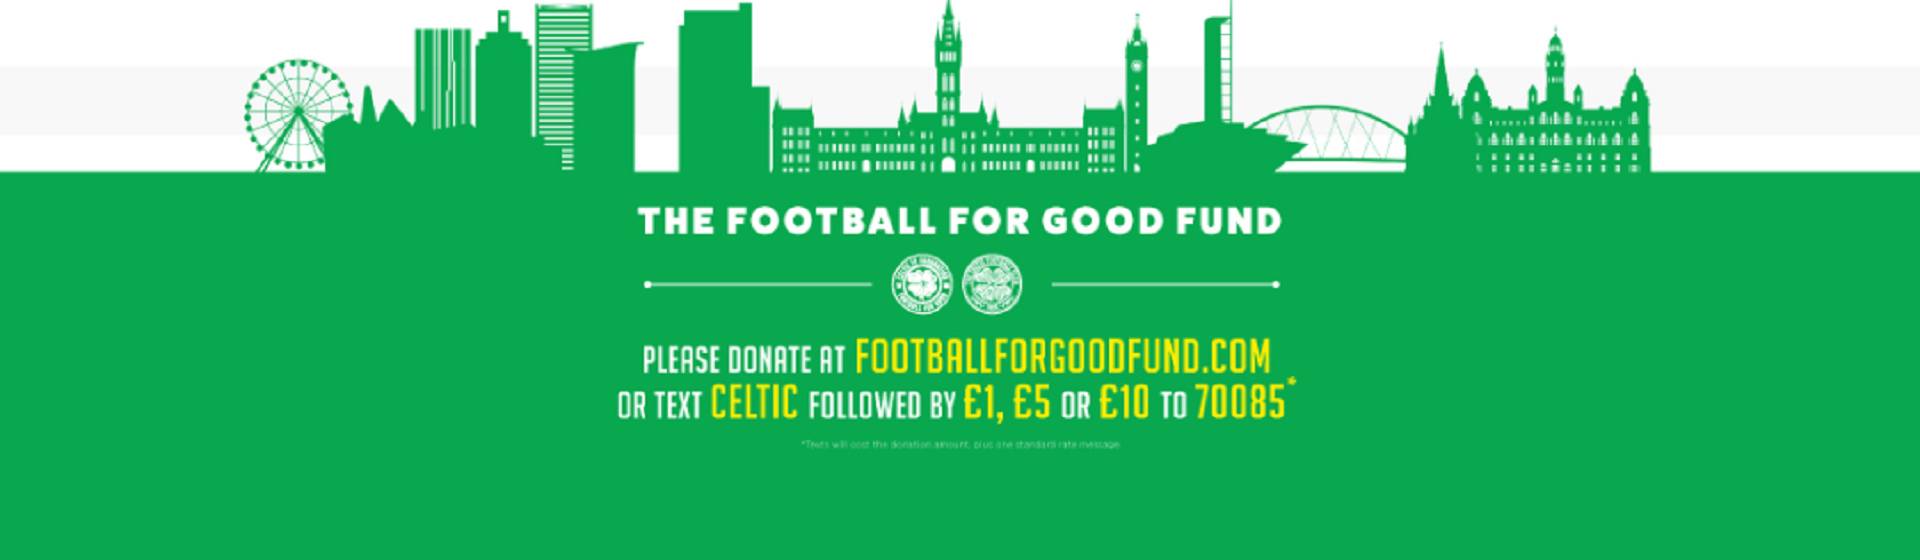 Celtic Fc Foundation S Football For Good Carries On Thanks To Supporters Generosity